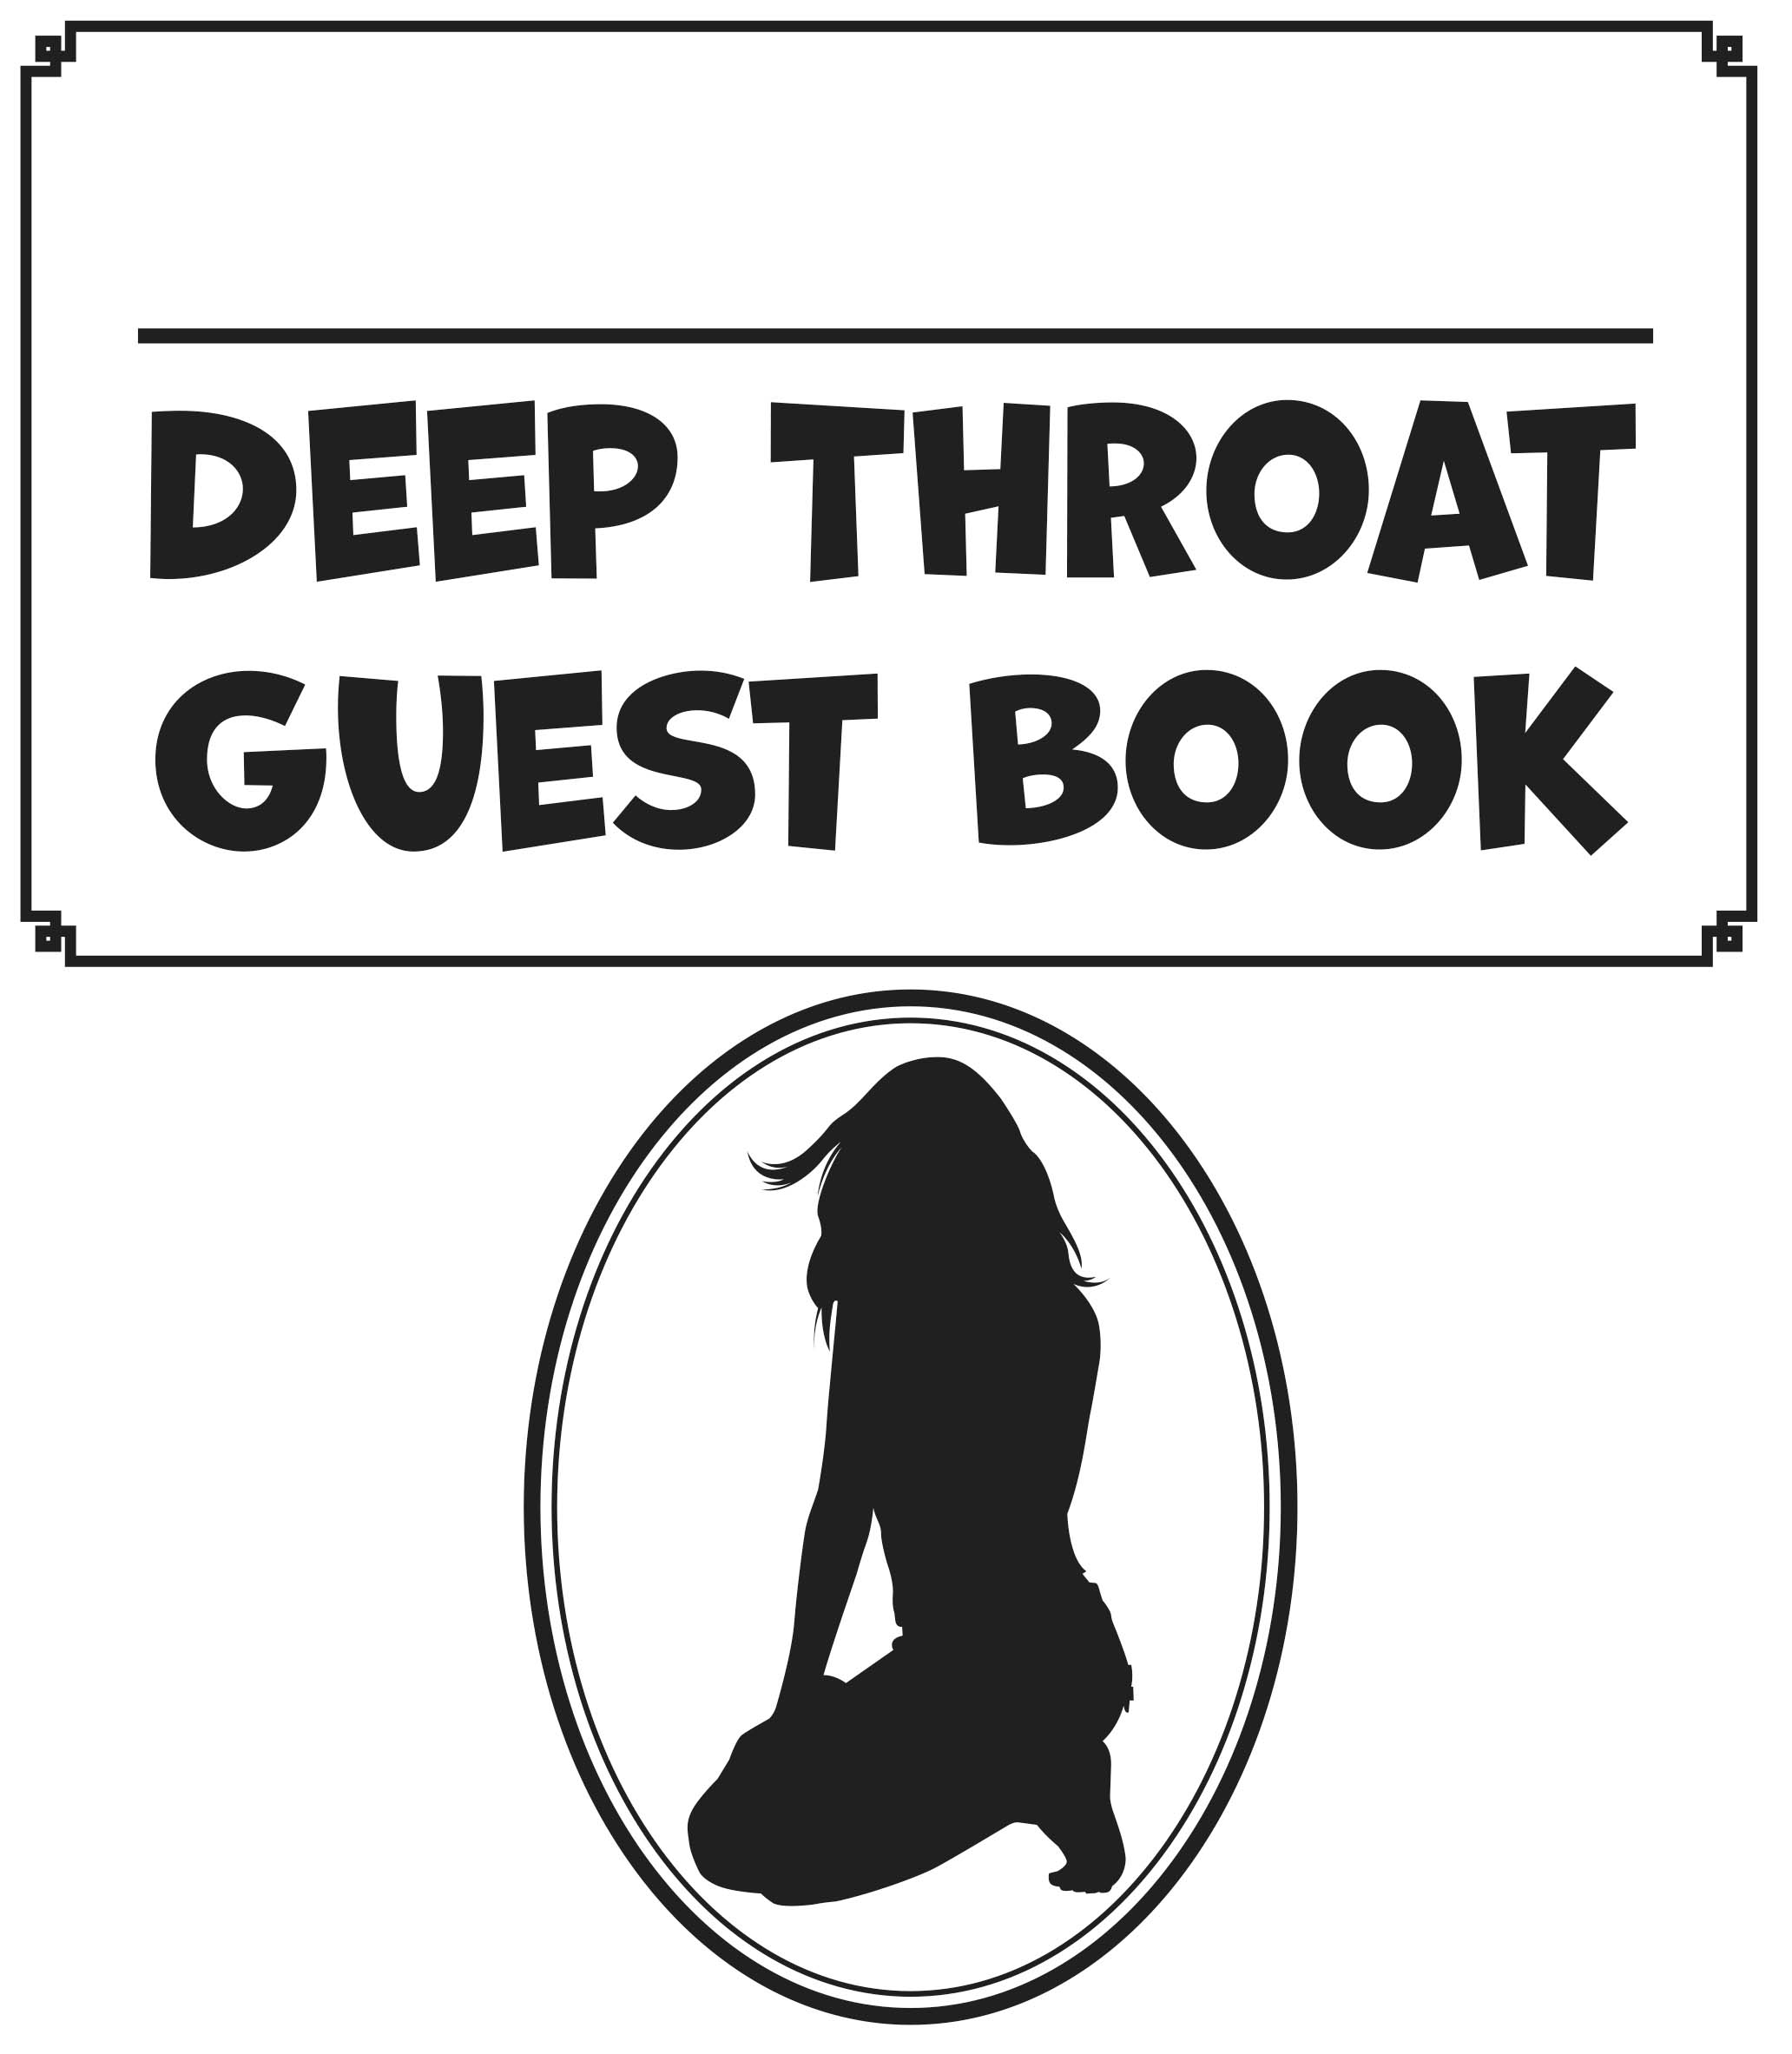 Deep Throat Guest Book Funny adult humor guest book to shock your guests Swingers Adventures Shop